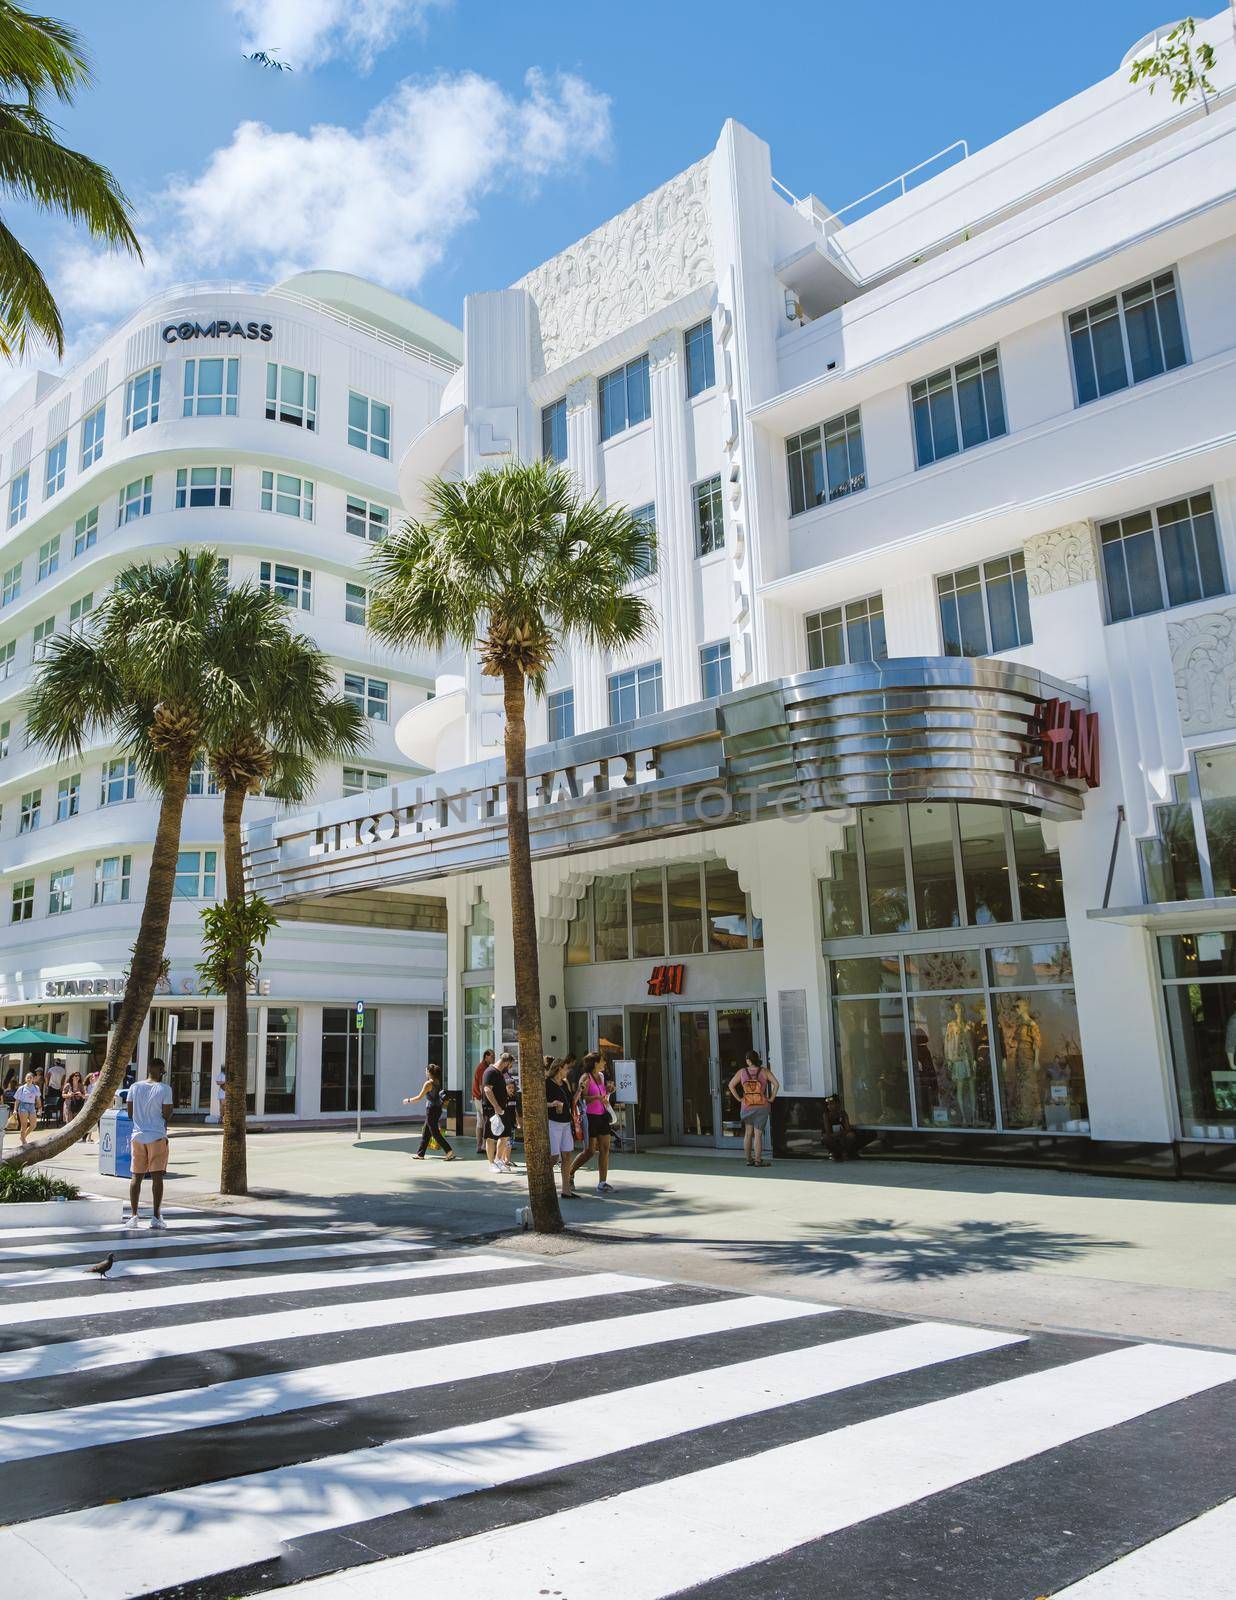 MIAMI BEACH - April 30, 2019: Beautiful Lincoln Road with H M shop. HM shop at shopping street by fokkebok